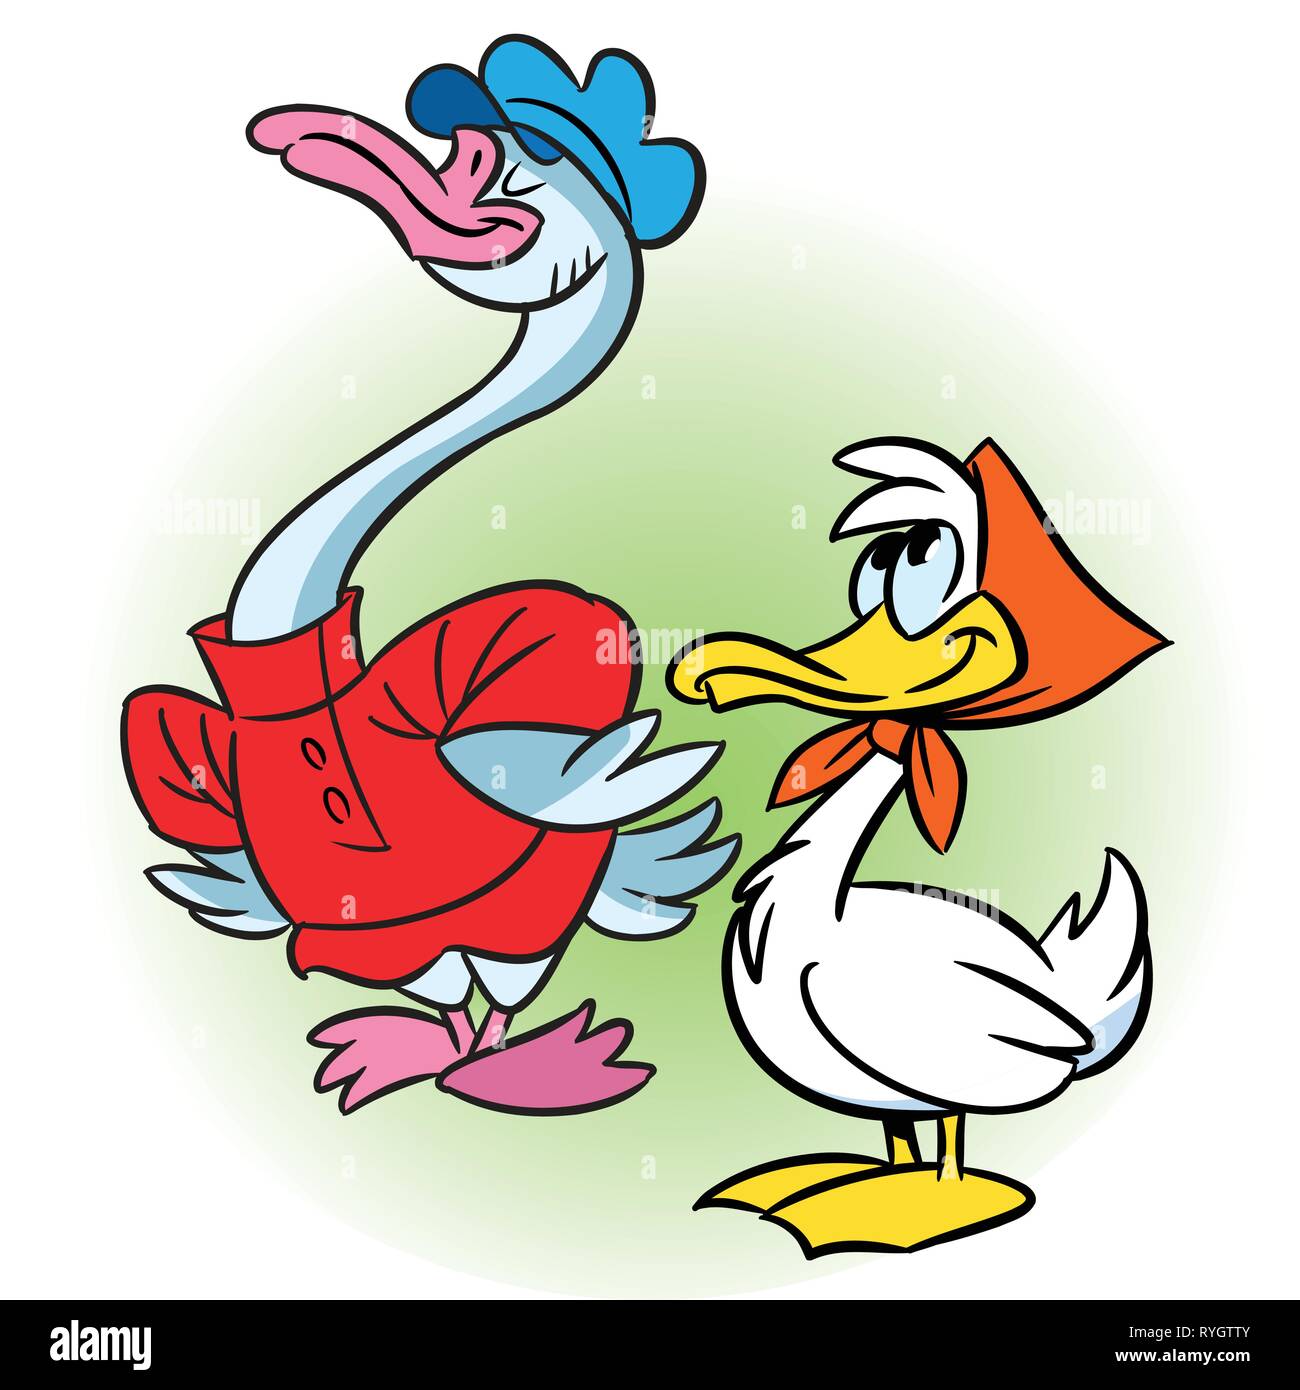 The illustration shows two ducks in a funny cartoon style, on separate layers. Stock Vector